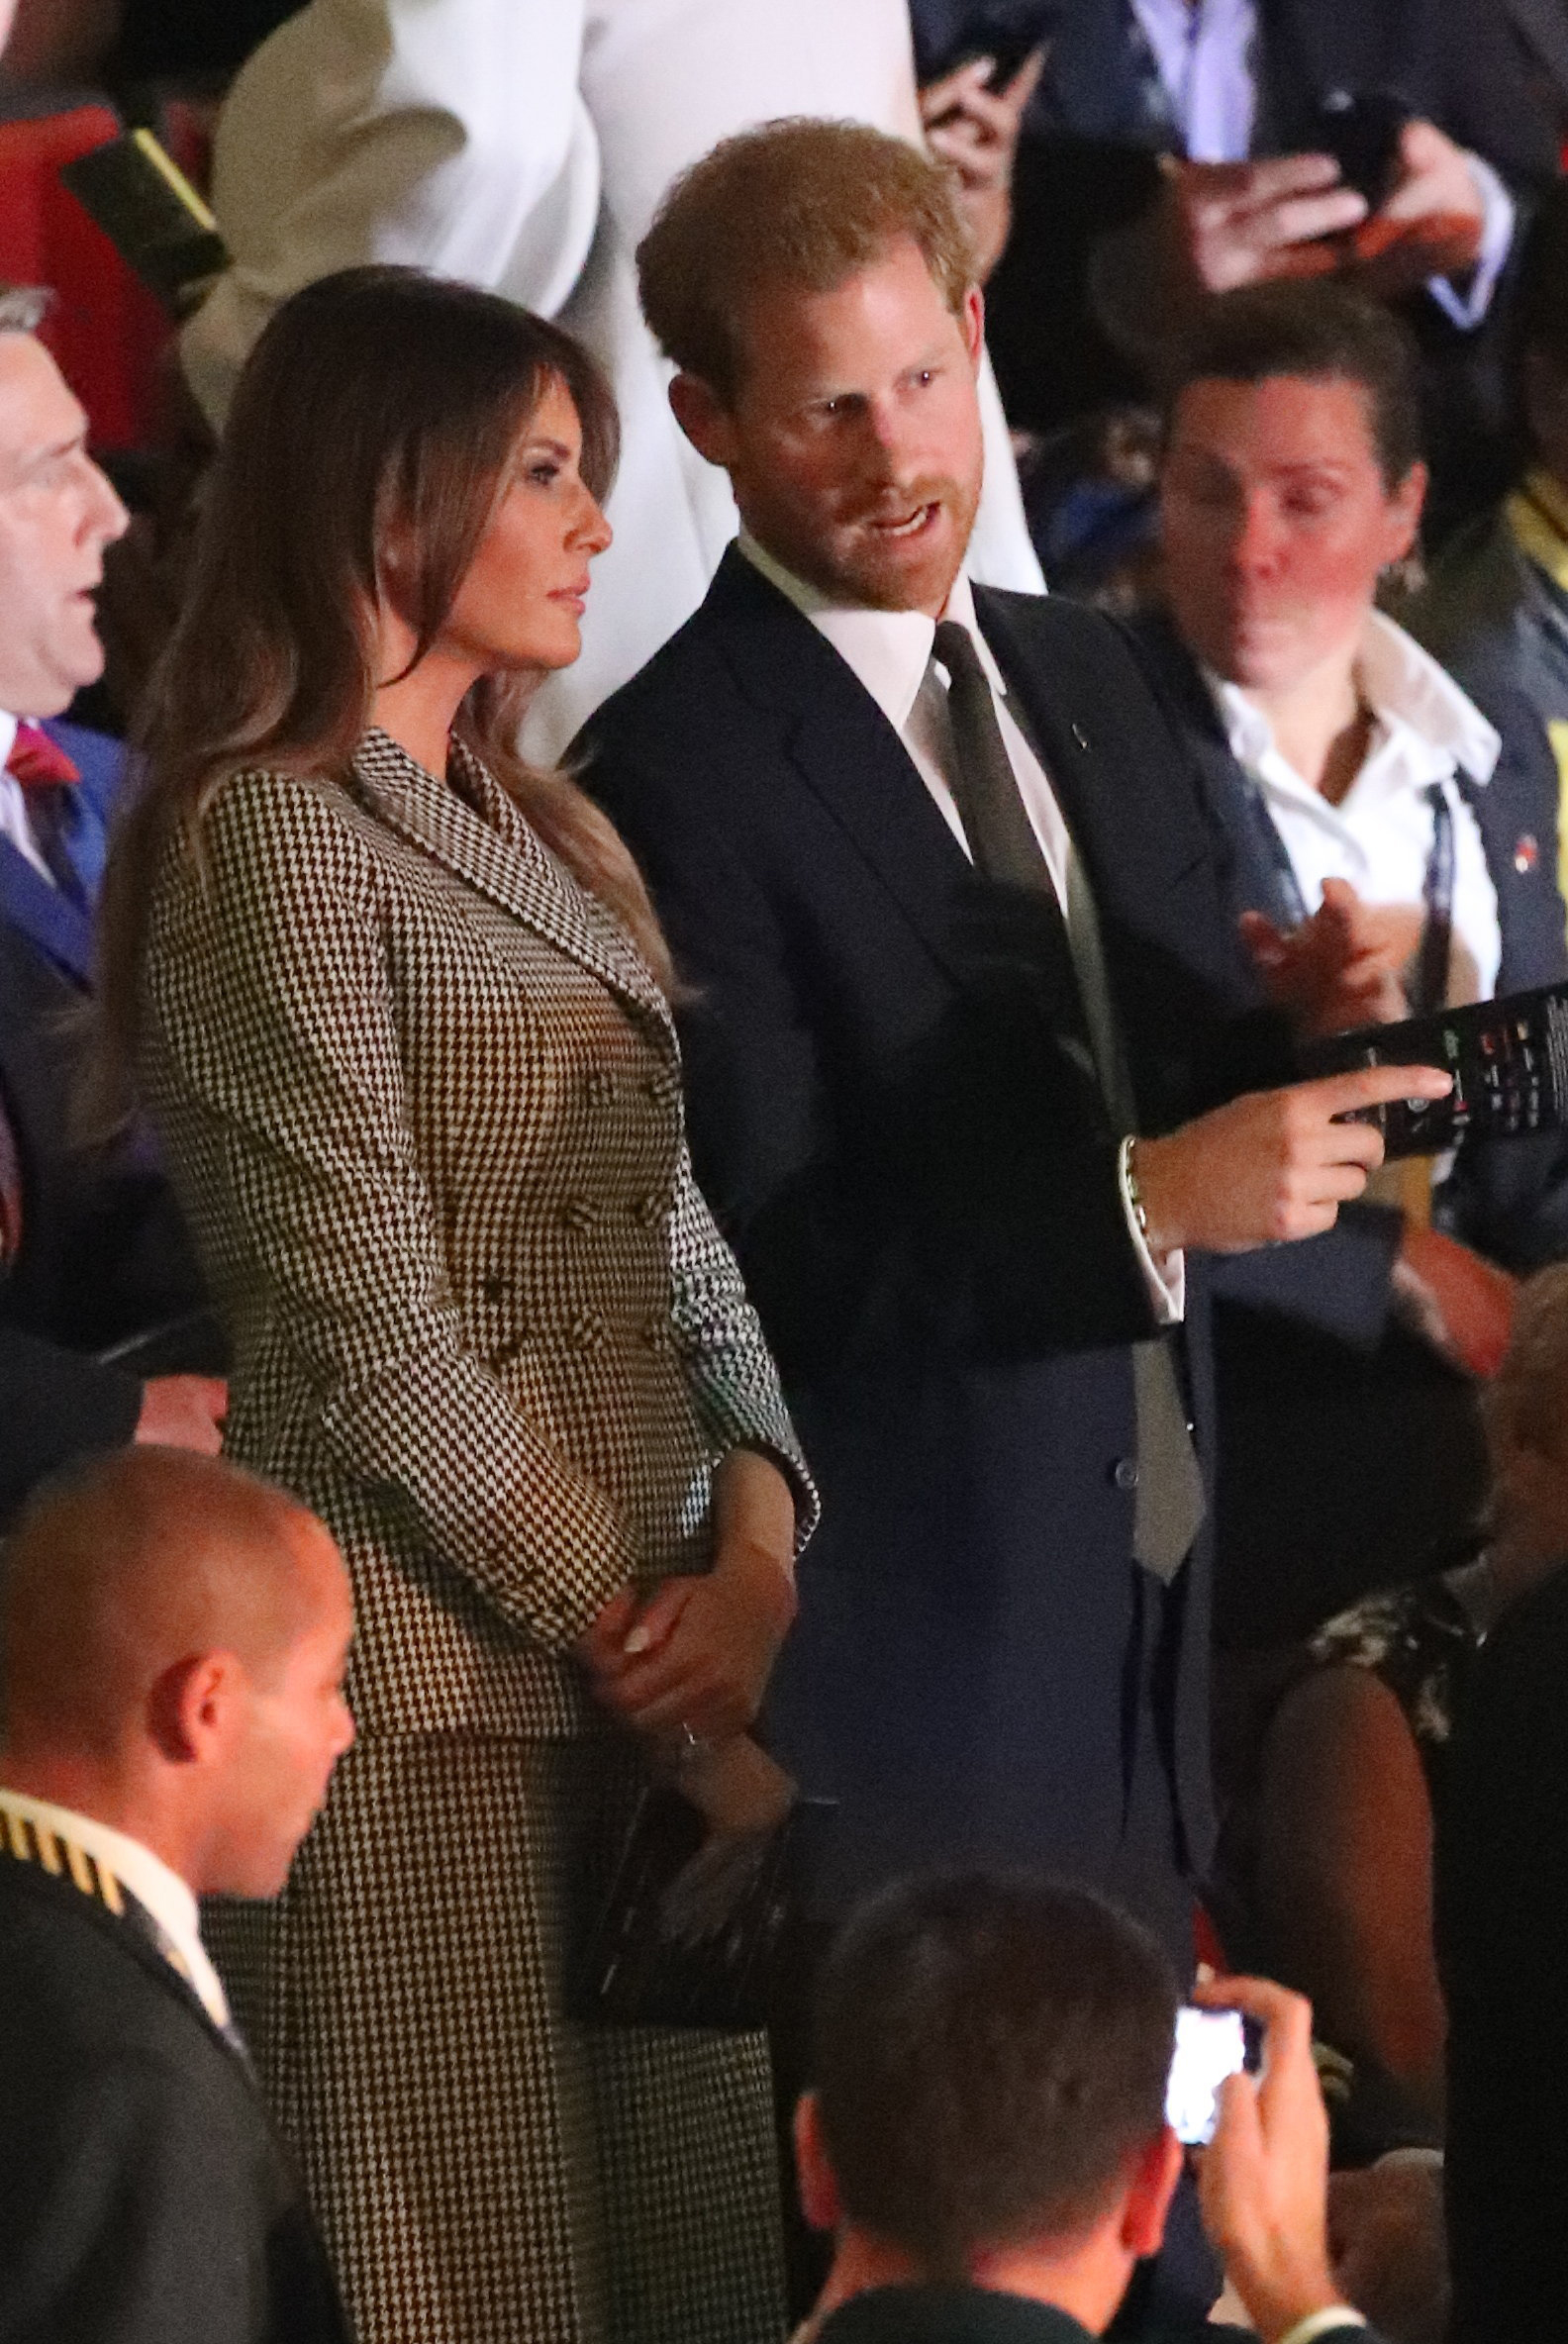 PHOTO: First lady Melania Trump and Prince Harry watch the opening ceremony of the Invictus Games in Toronto.